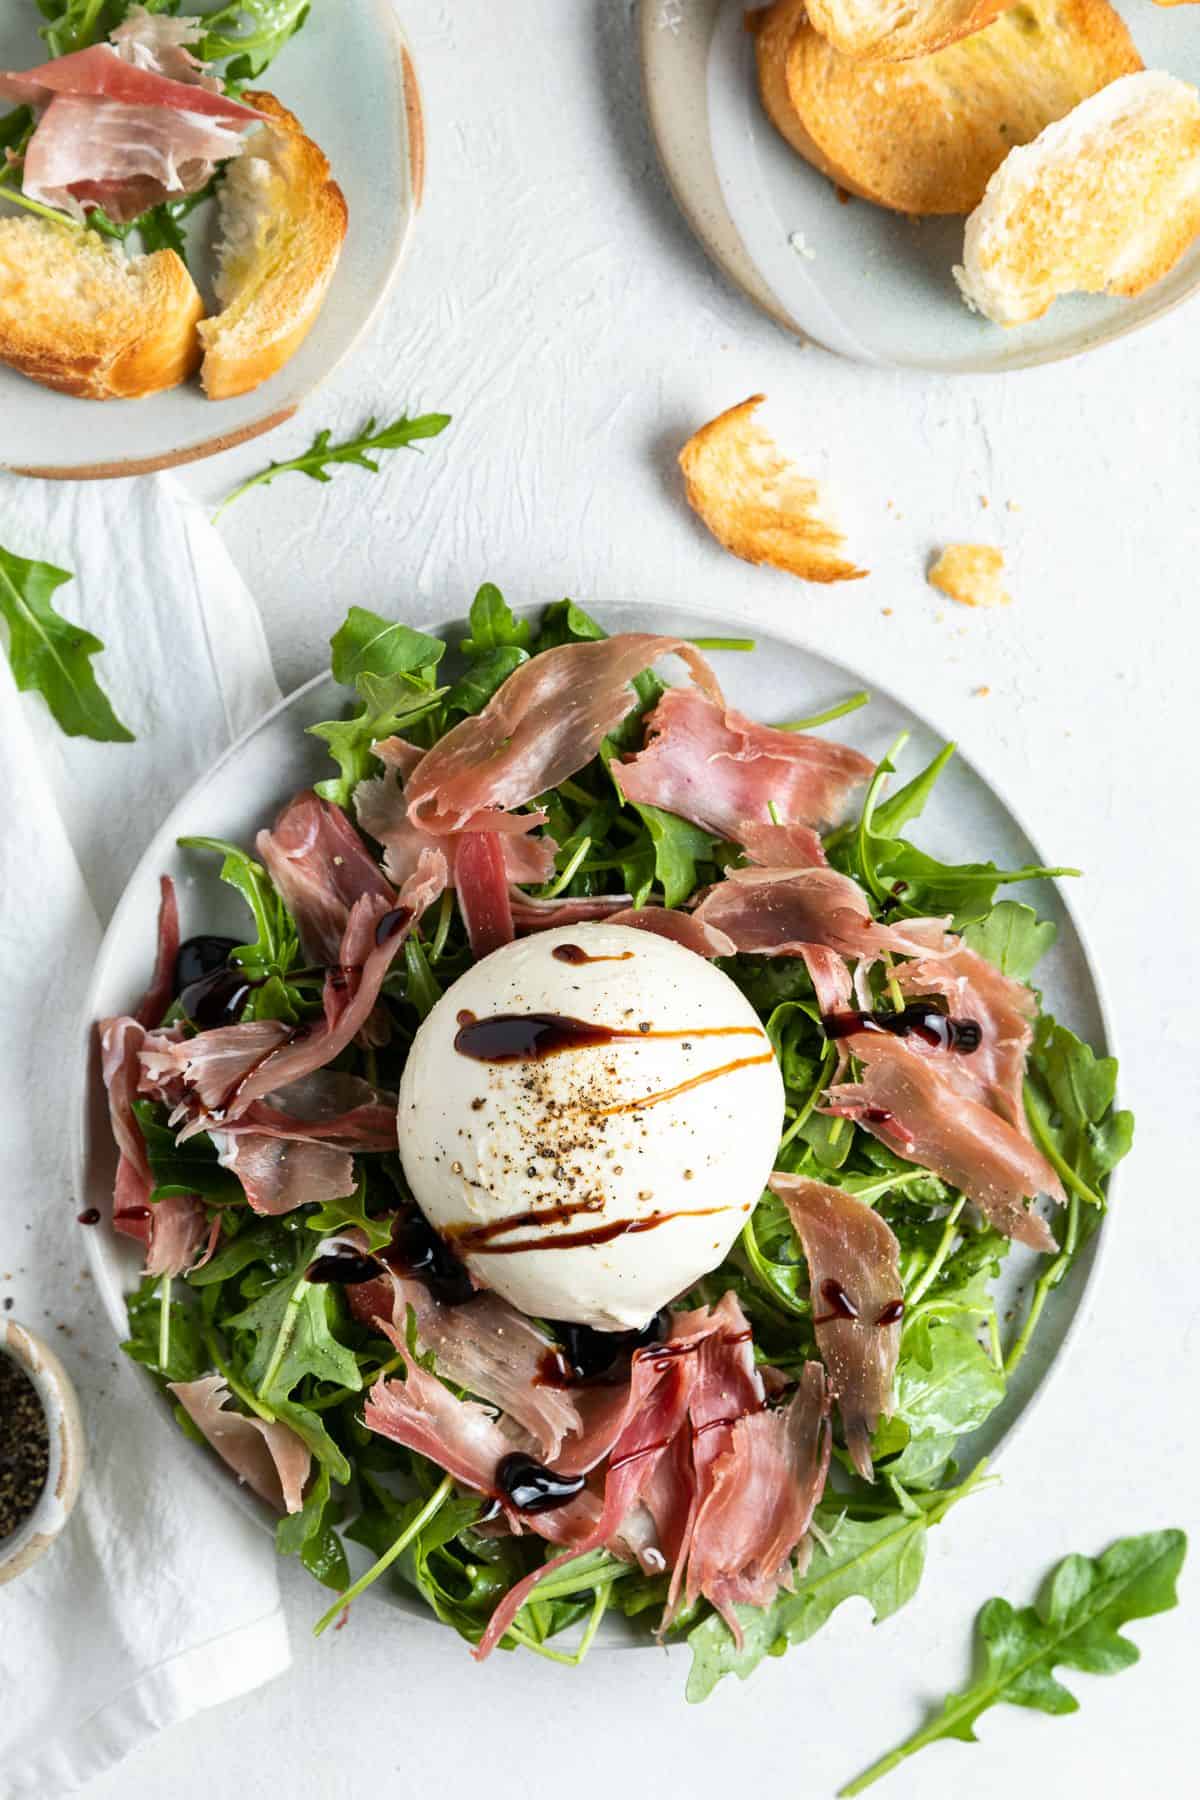 Burrata and prosciutto appetiser sitting on a round plate, with a dish of toasted bread in the corner.